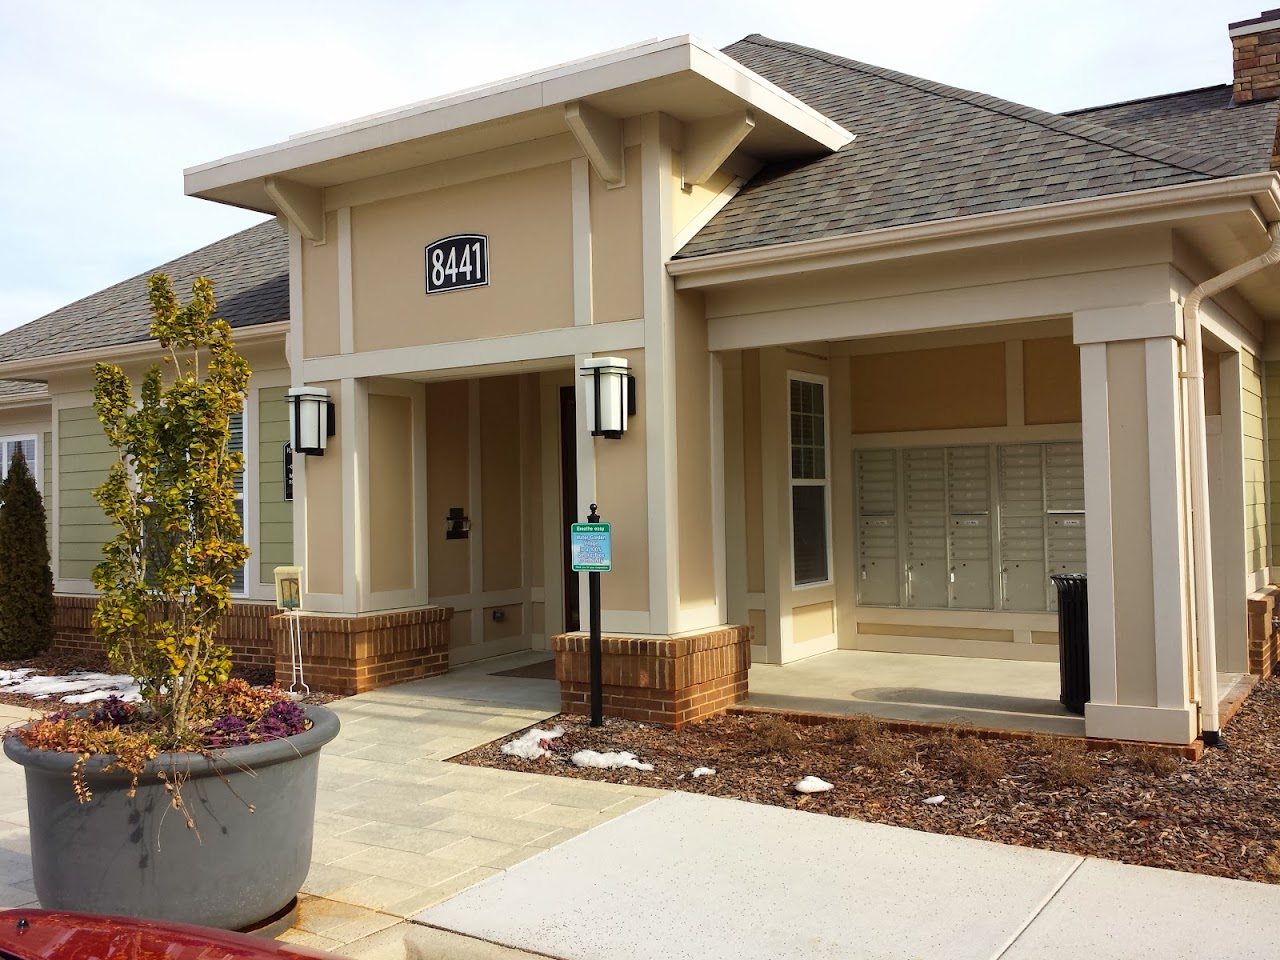 Photo of WATER GARDEN VILLAGE. Affordable housing located at 8441 MOUNT VALLEY LN RALEIGH, NC 27613